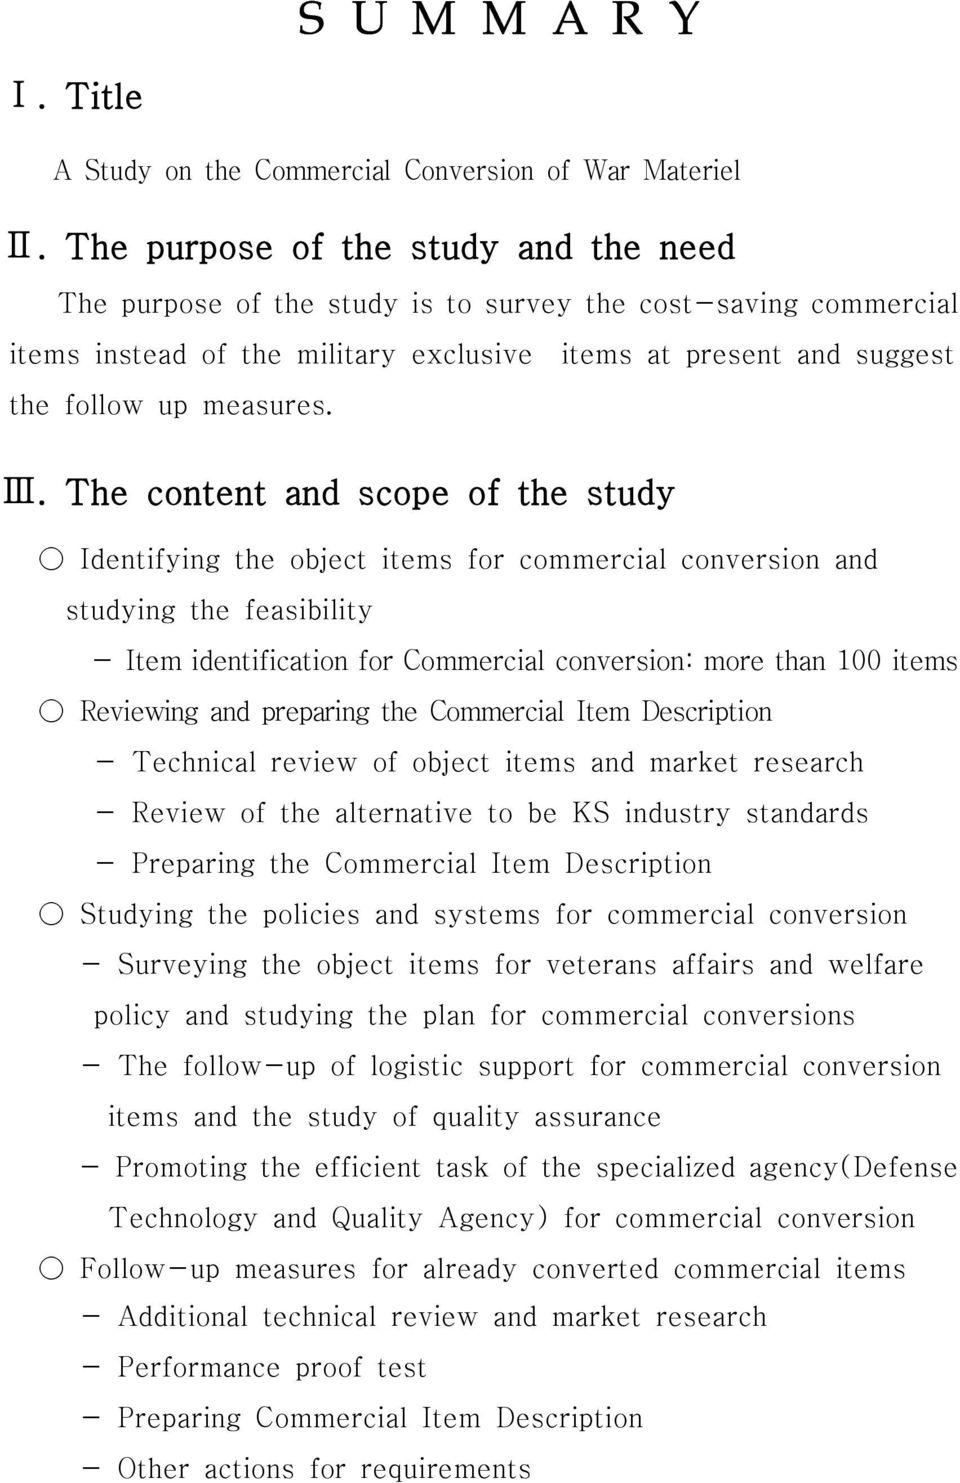 The content and scope of the study Identifying the object items for commercial conversion and studying the feasibility - Item identification for Commercial conversion: more than 100 items Reviewing